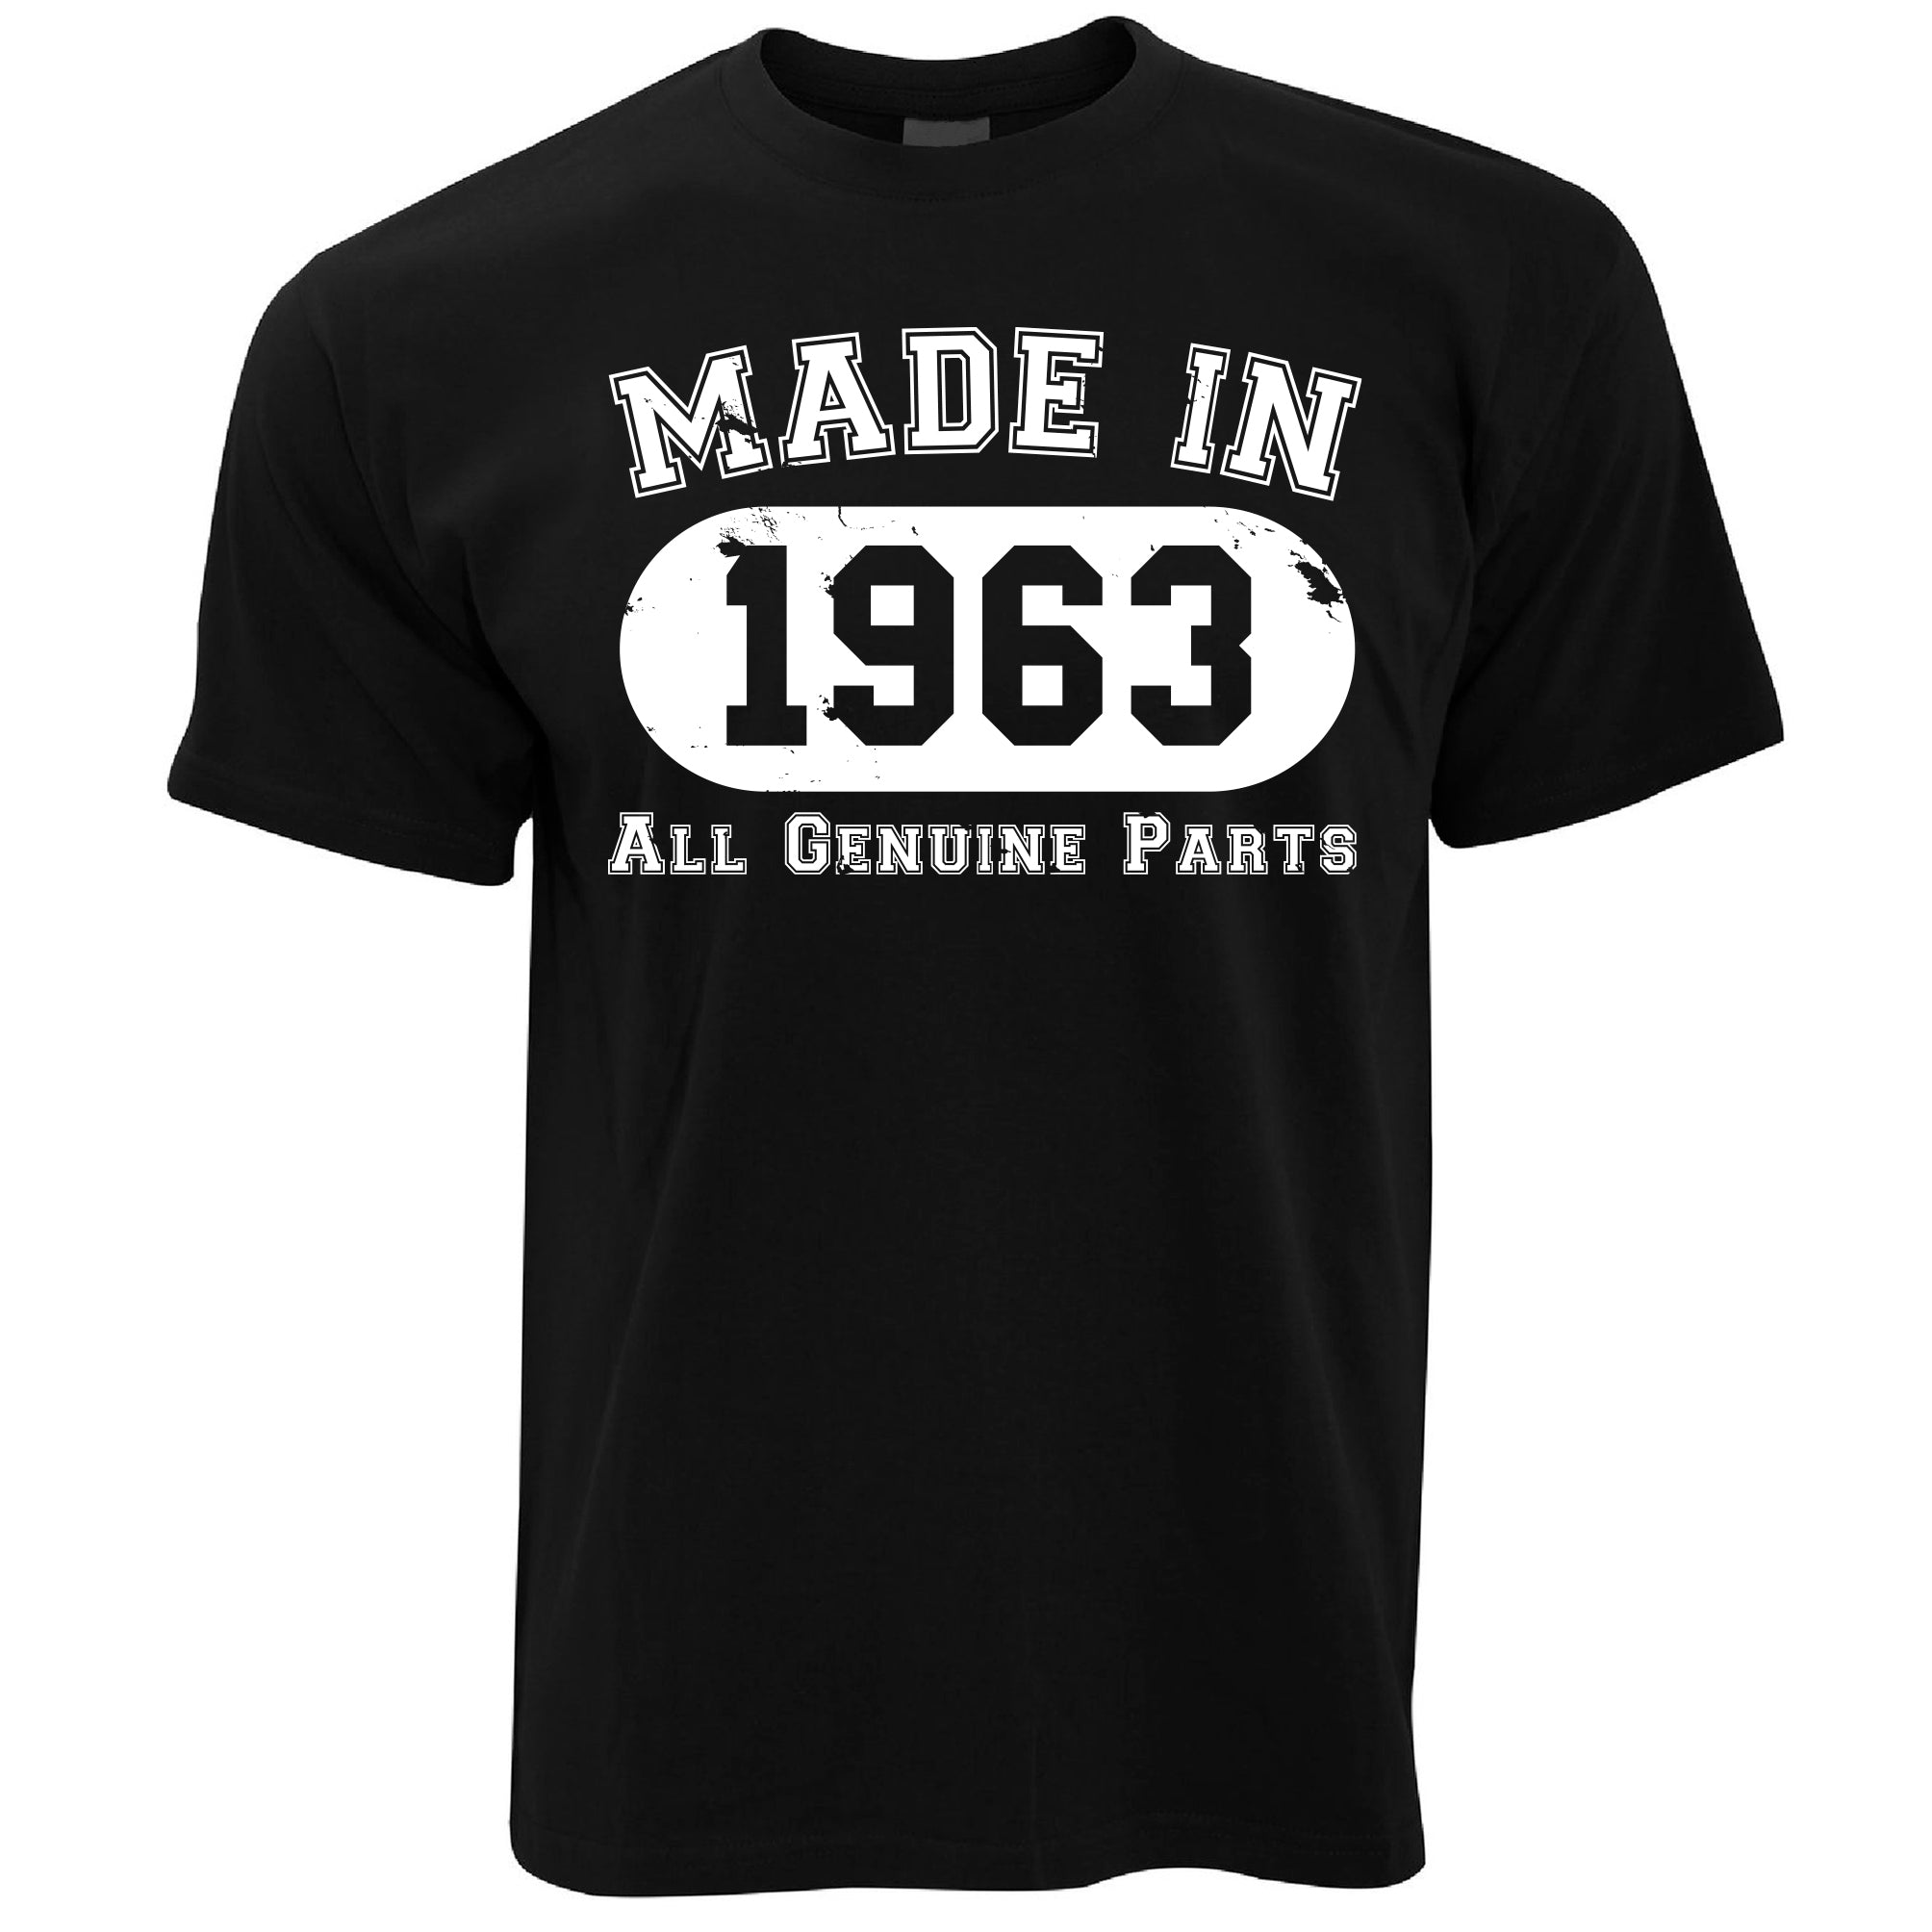 60th Birthday T Shirt Made in 1963 - All Genuine Parts